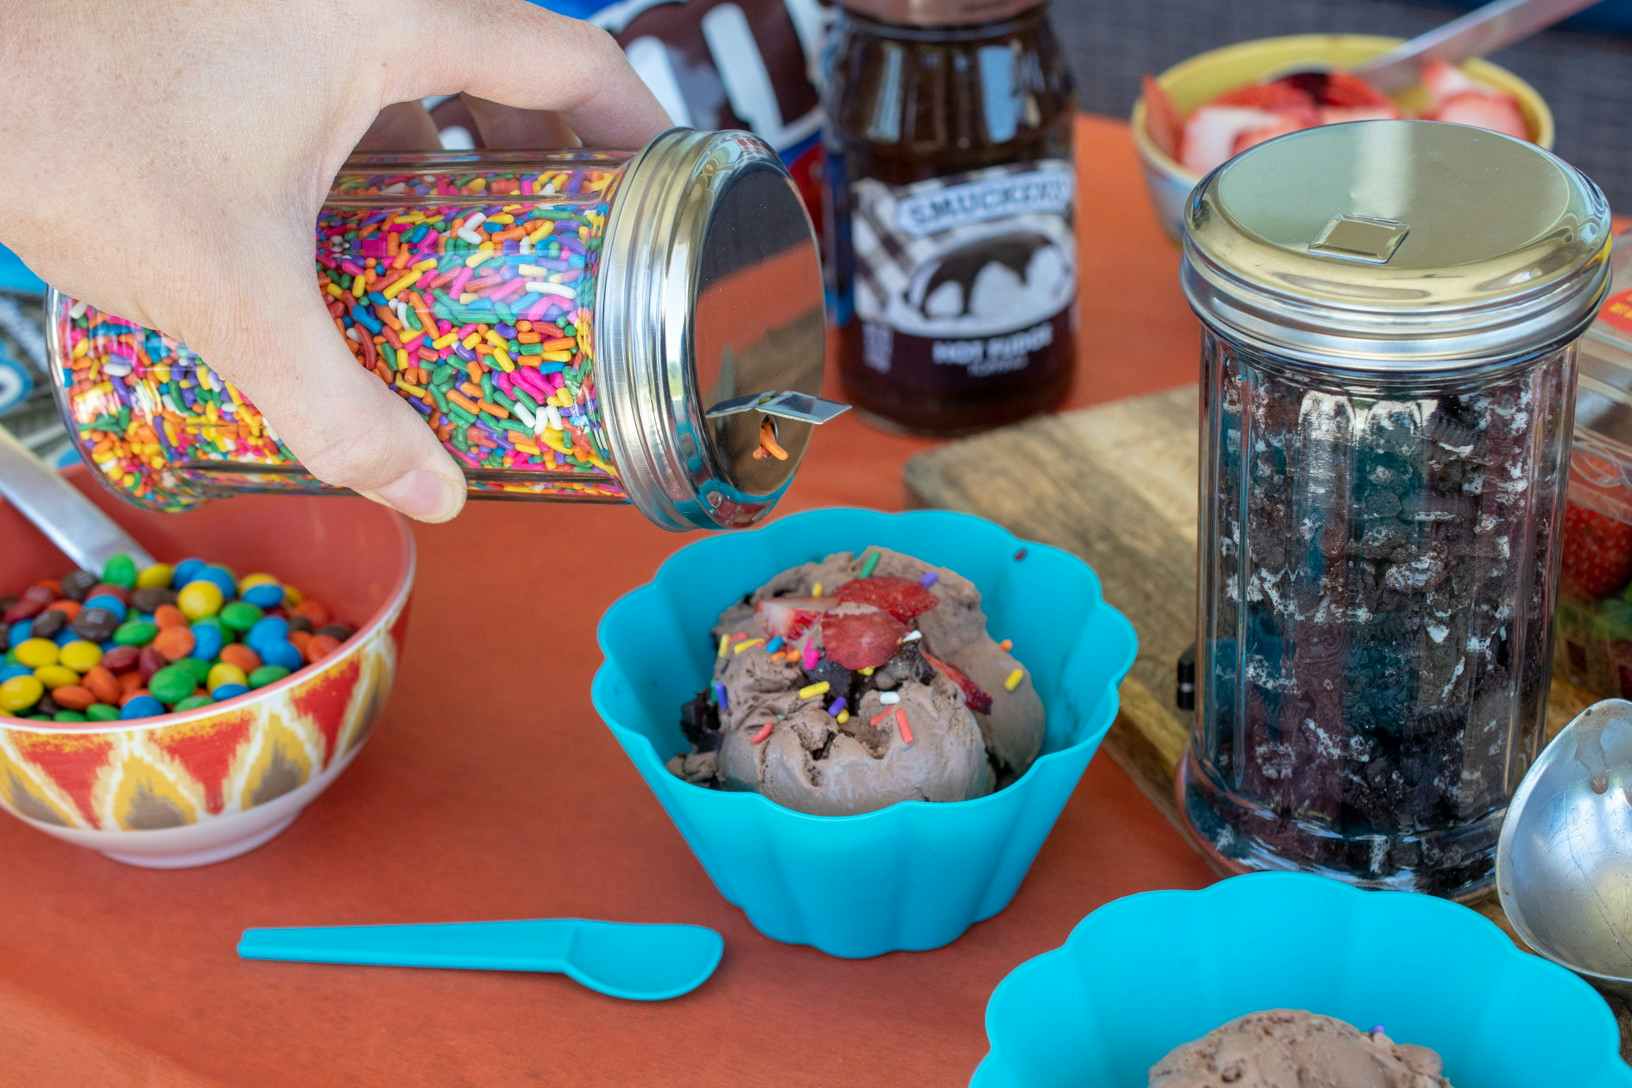 A person's hand pouring a jar of sprinkles onto a small bowl of ice cream on a table next to more ice cream sundae ingredients.